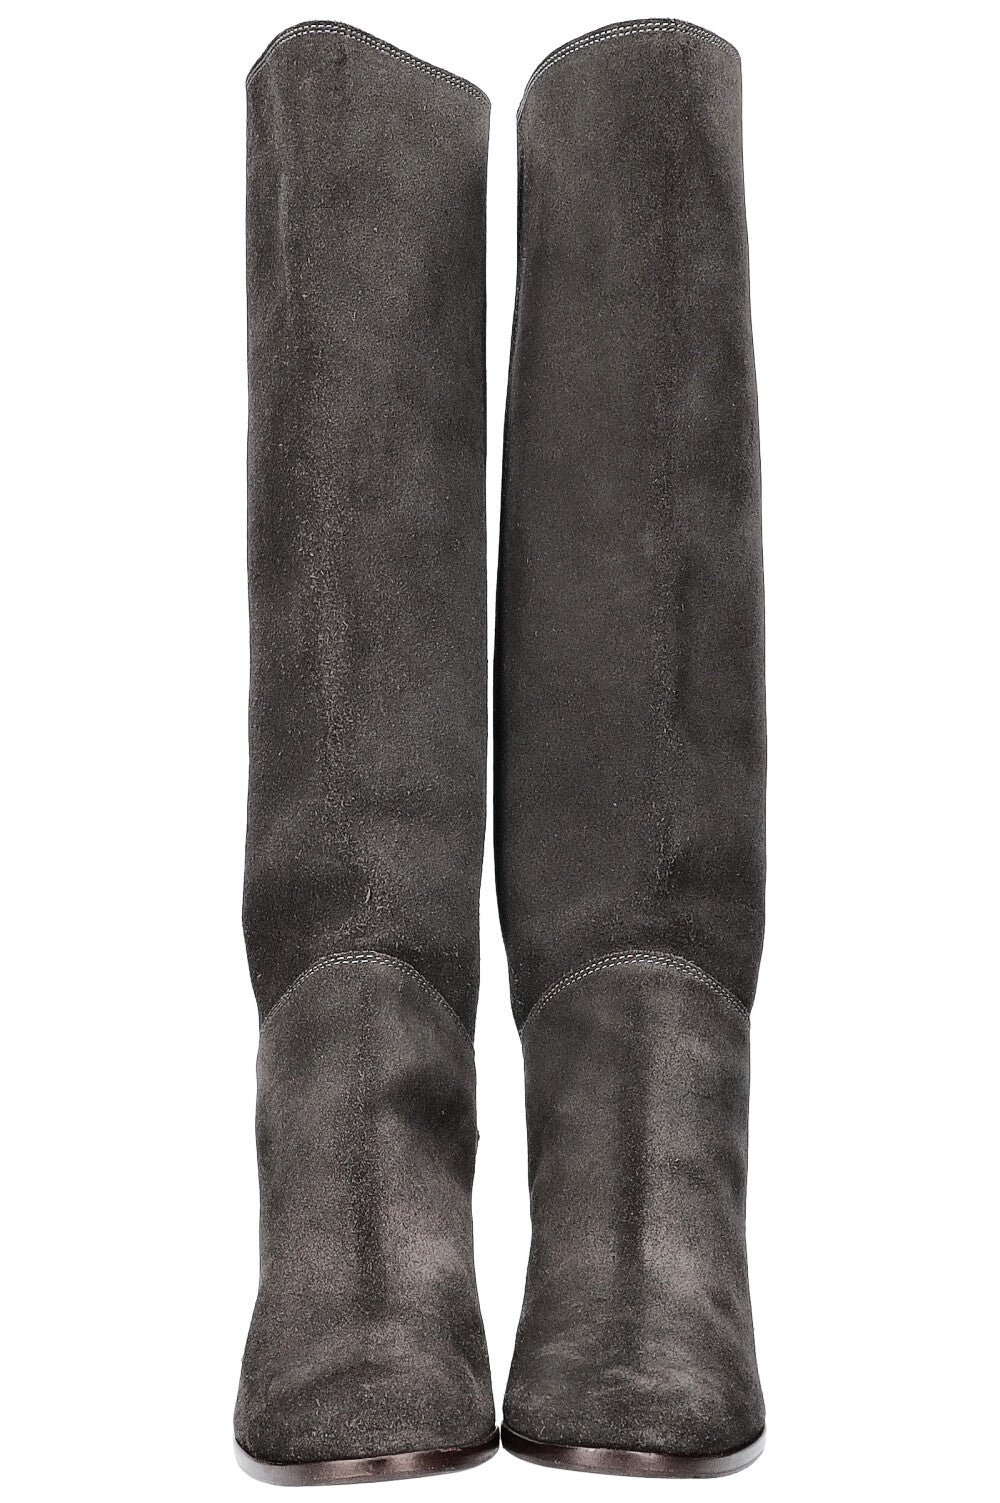 CHANEL Boots Suede Grey